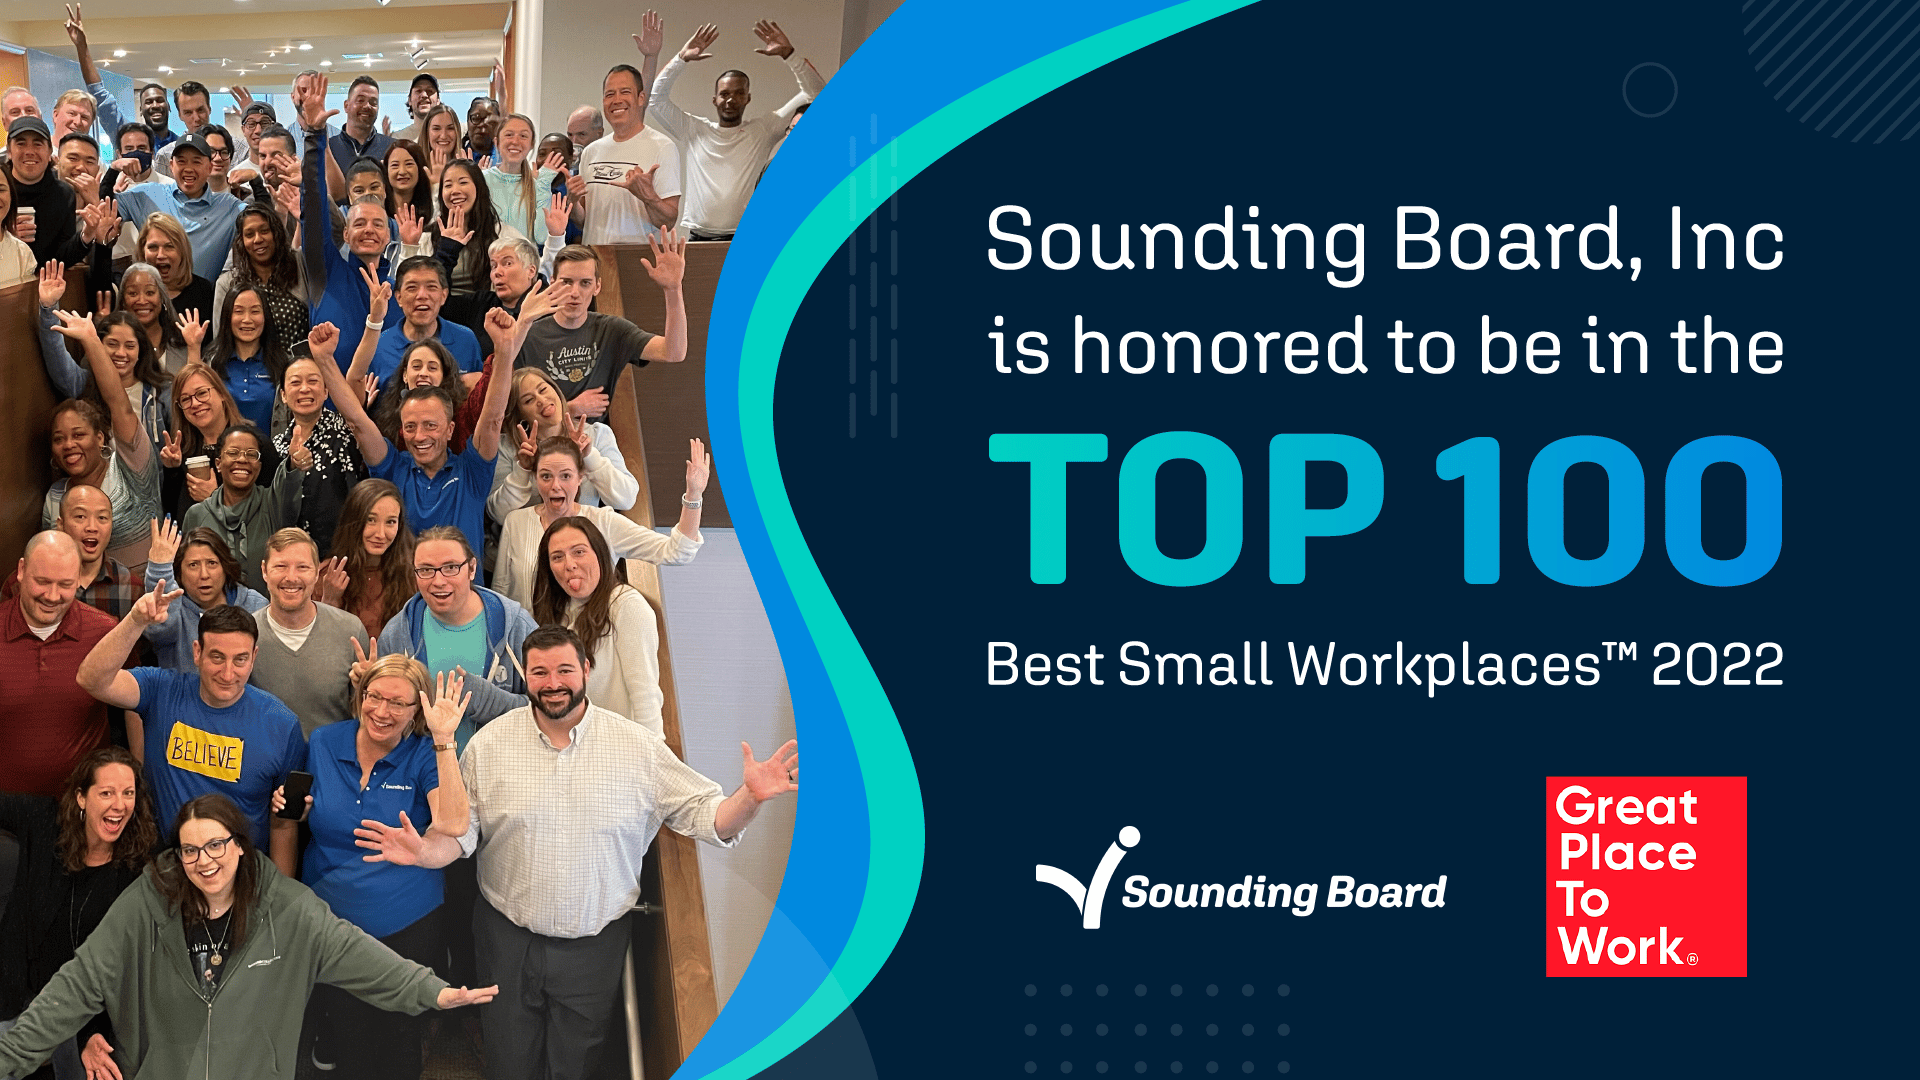 Sounding Board Named to Fortune Best Small Workplaces 2022 List